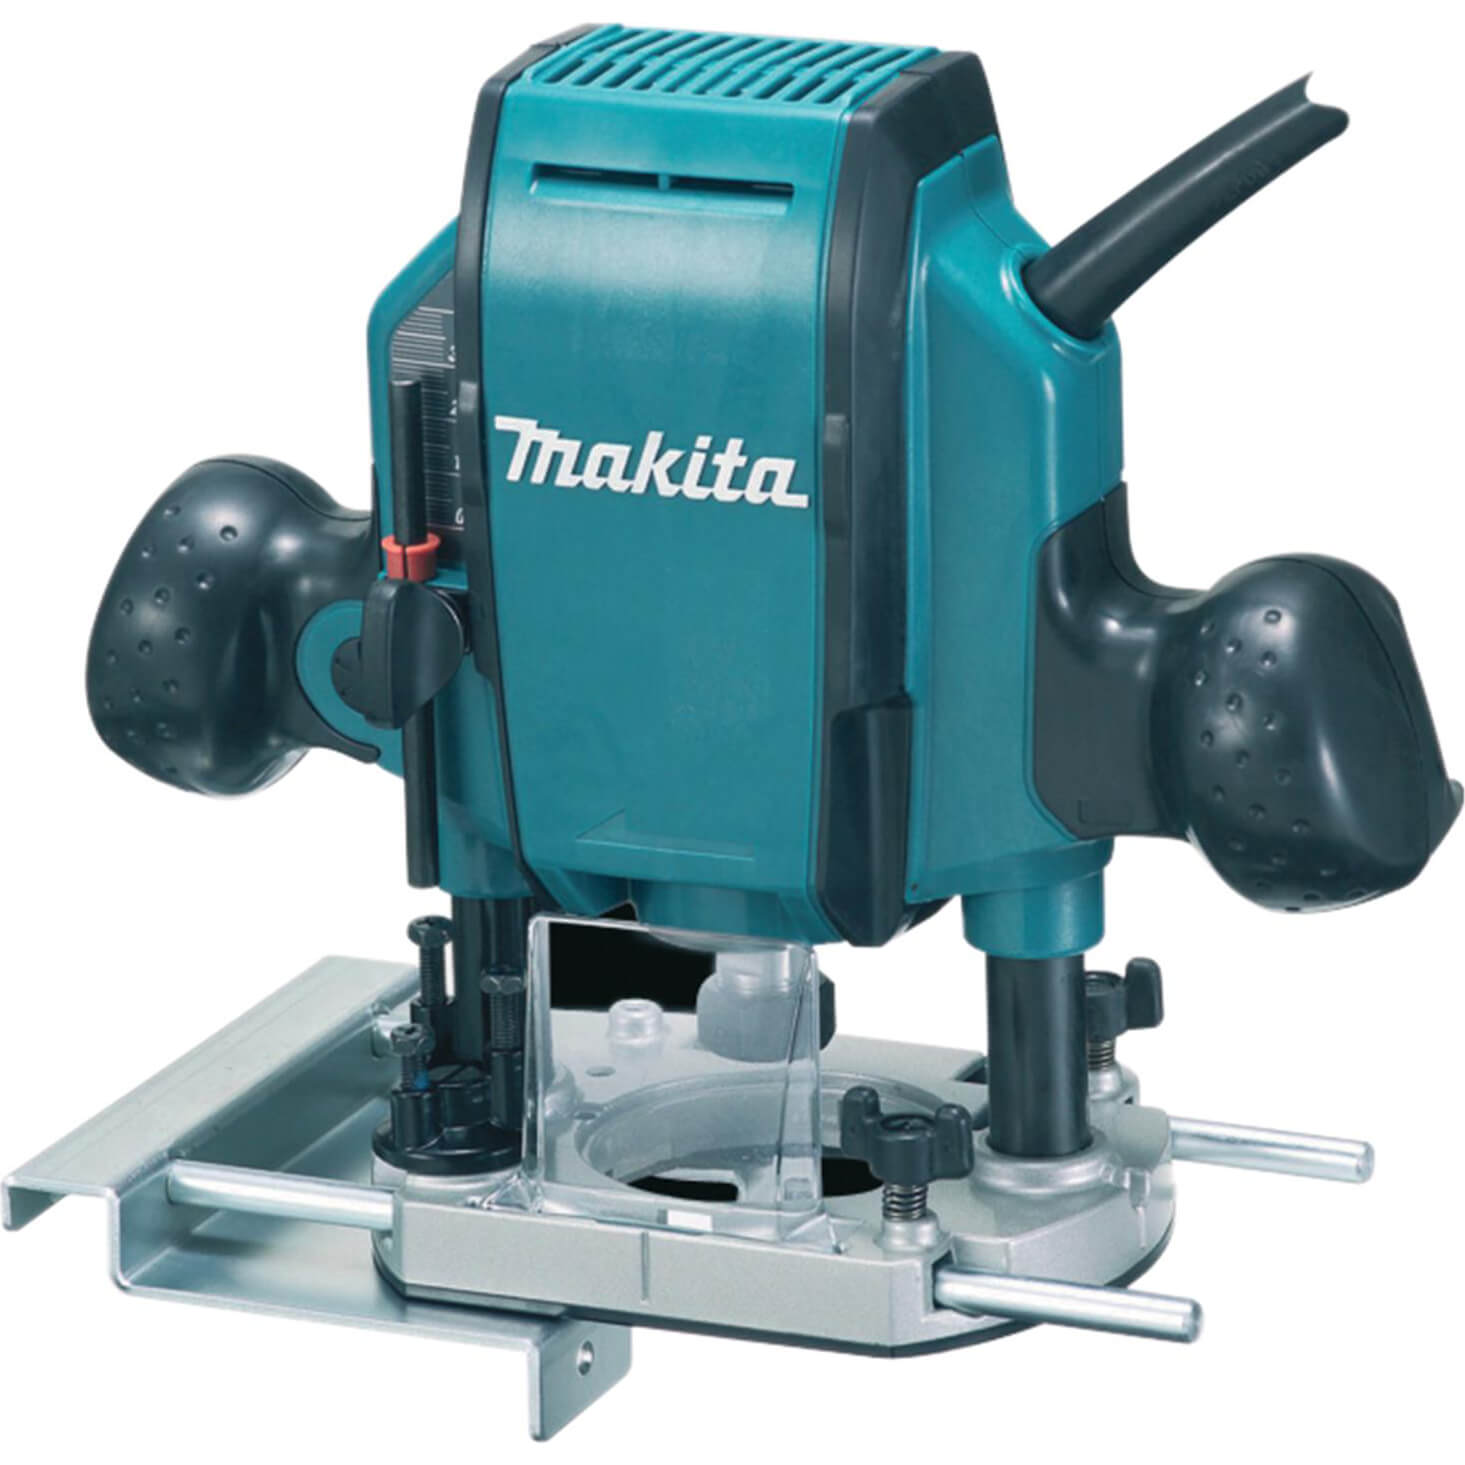 Image of Makita RP0900X 1/4" or 3/8" Plunge Router 240v